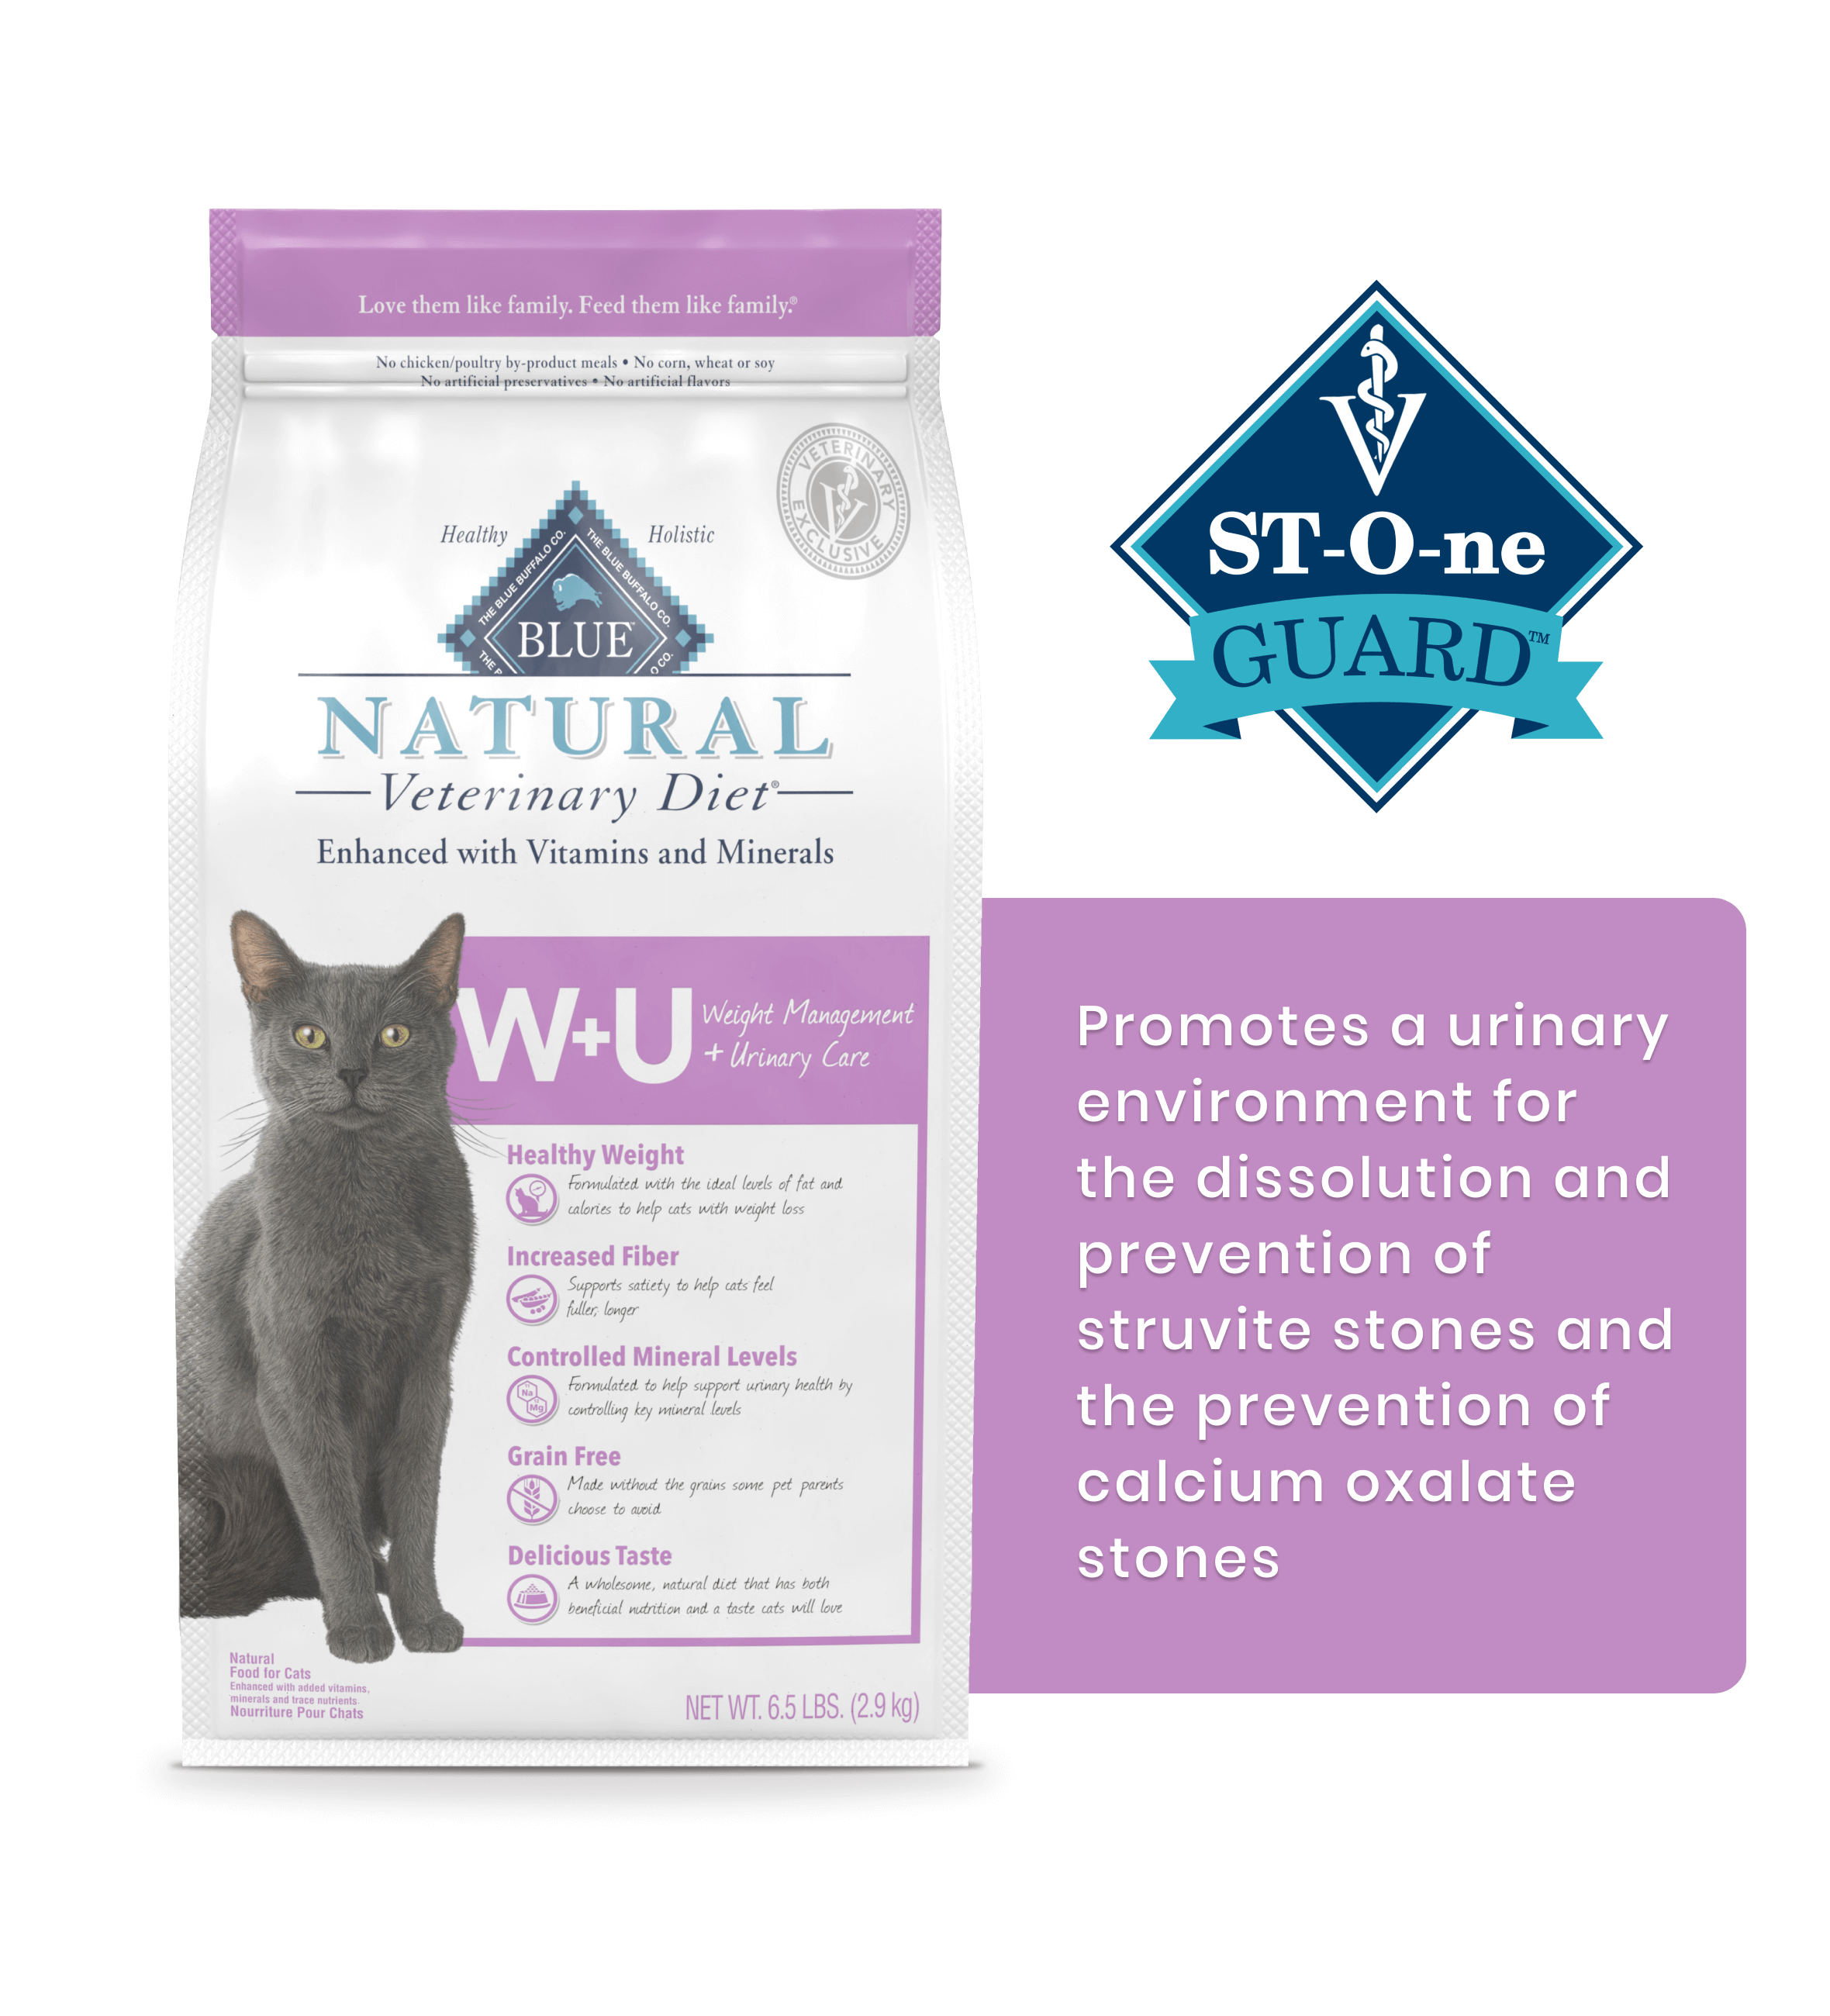 W+U Weight Management + Urinary Care St-O-ne Guard Promotes a urinary environment for the dissolution and prevention of struvite stones and the prevention of calcium oxalate stones